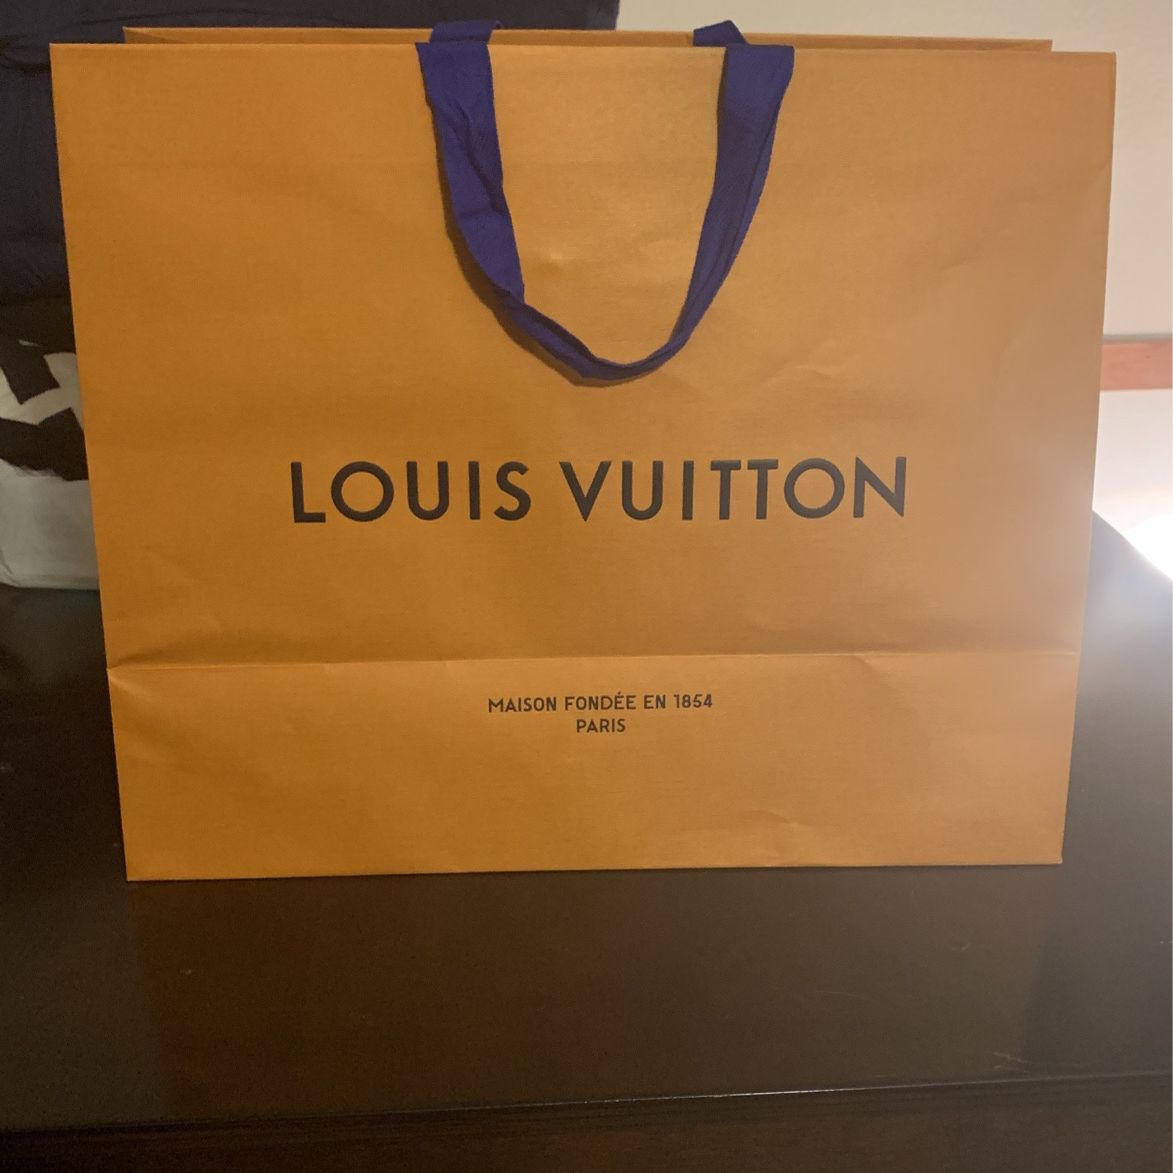 Louis Vuitton Speedy Bandouliere Bag Limited Edition Patches Damier 30 for  Sale in Las Vegas, NV - OfferUp